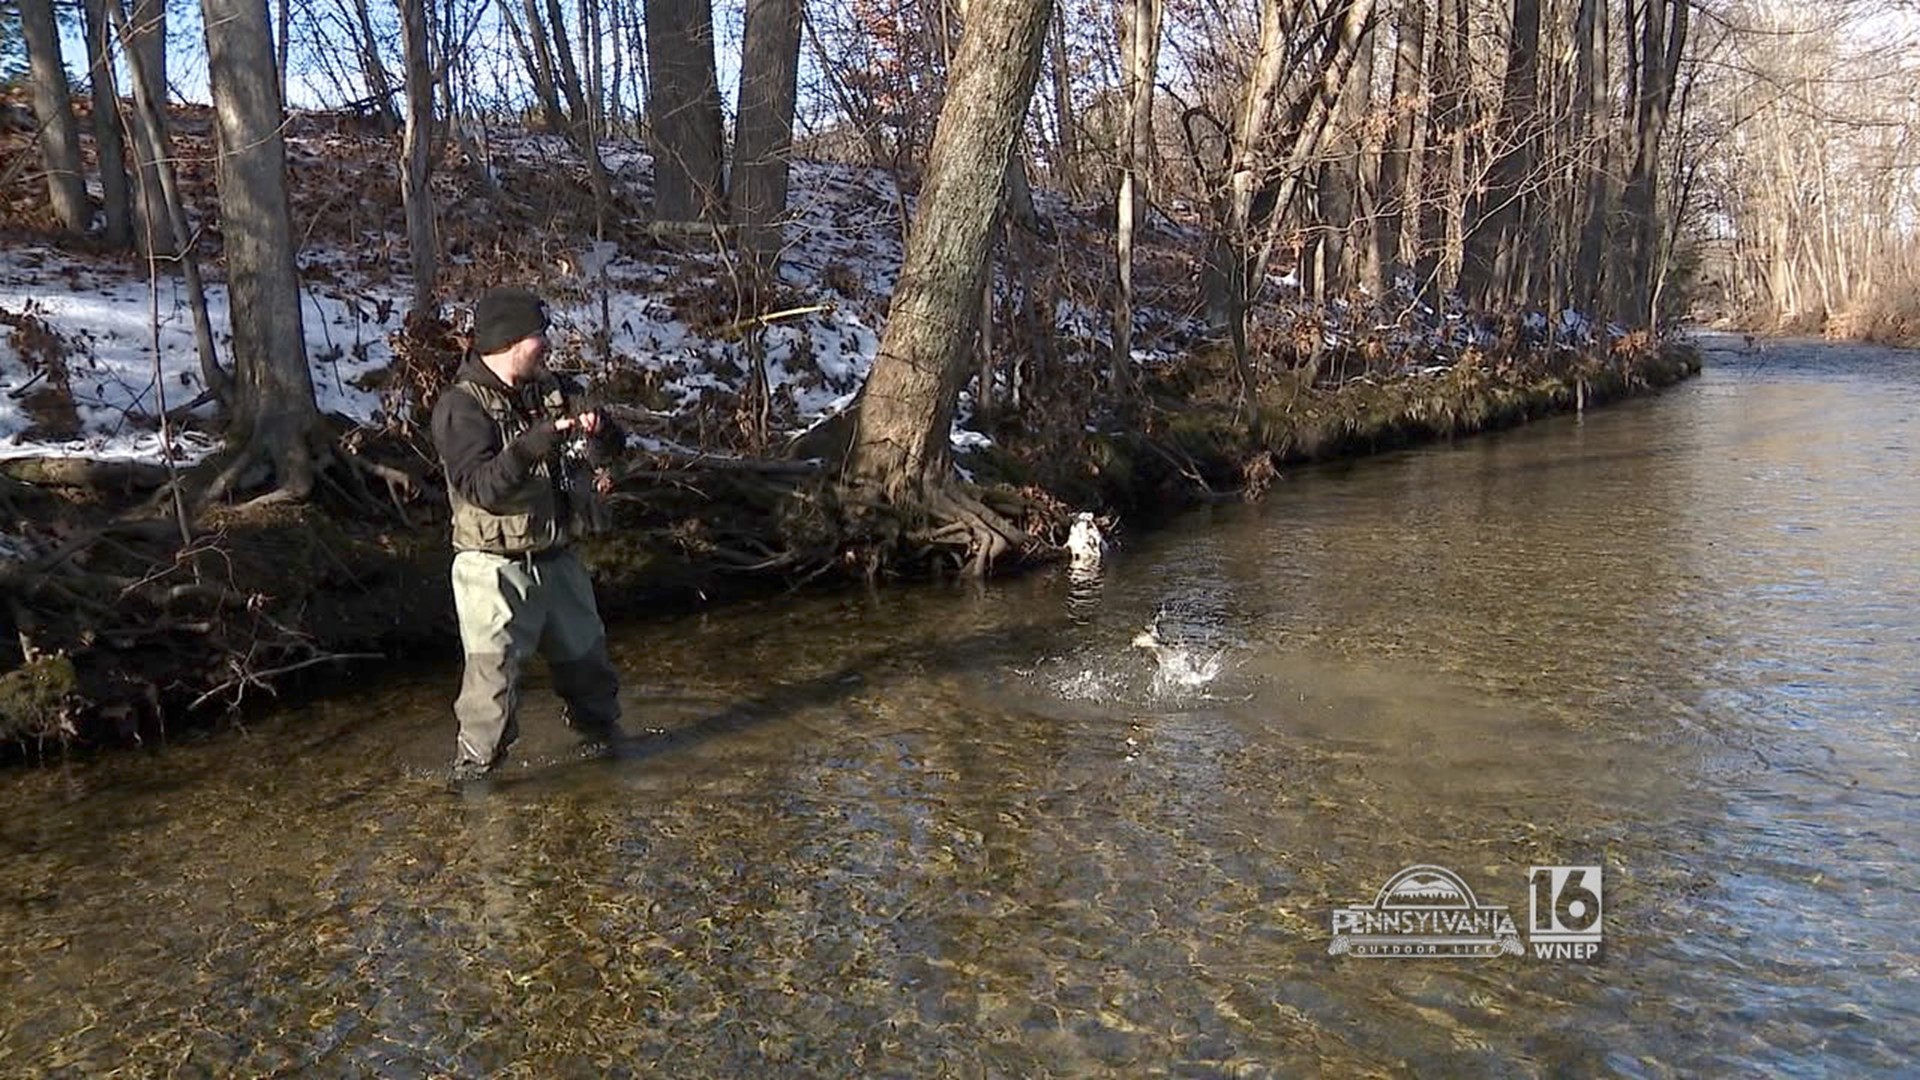 Catching wild brown trout in the middle of winter.